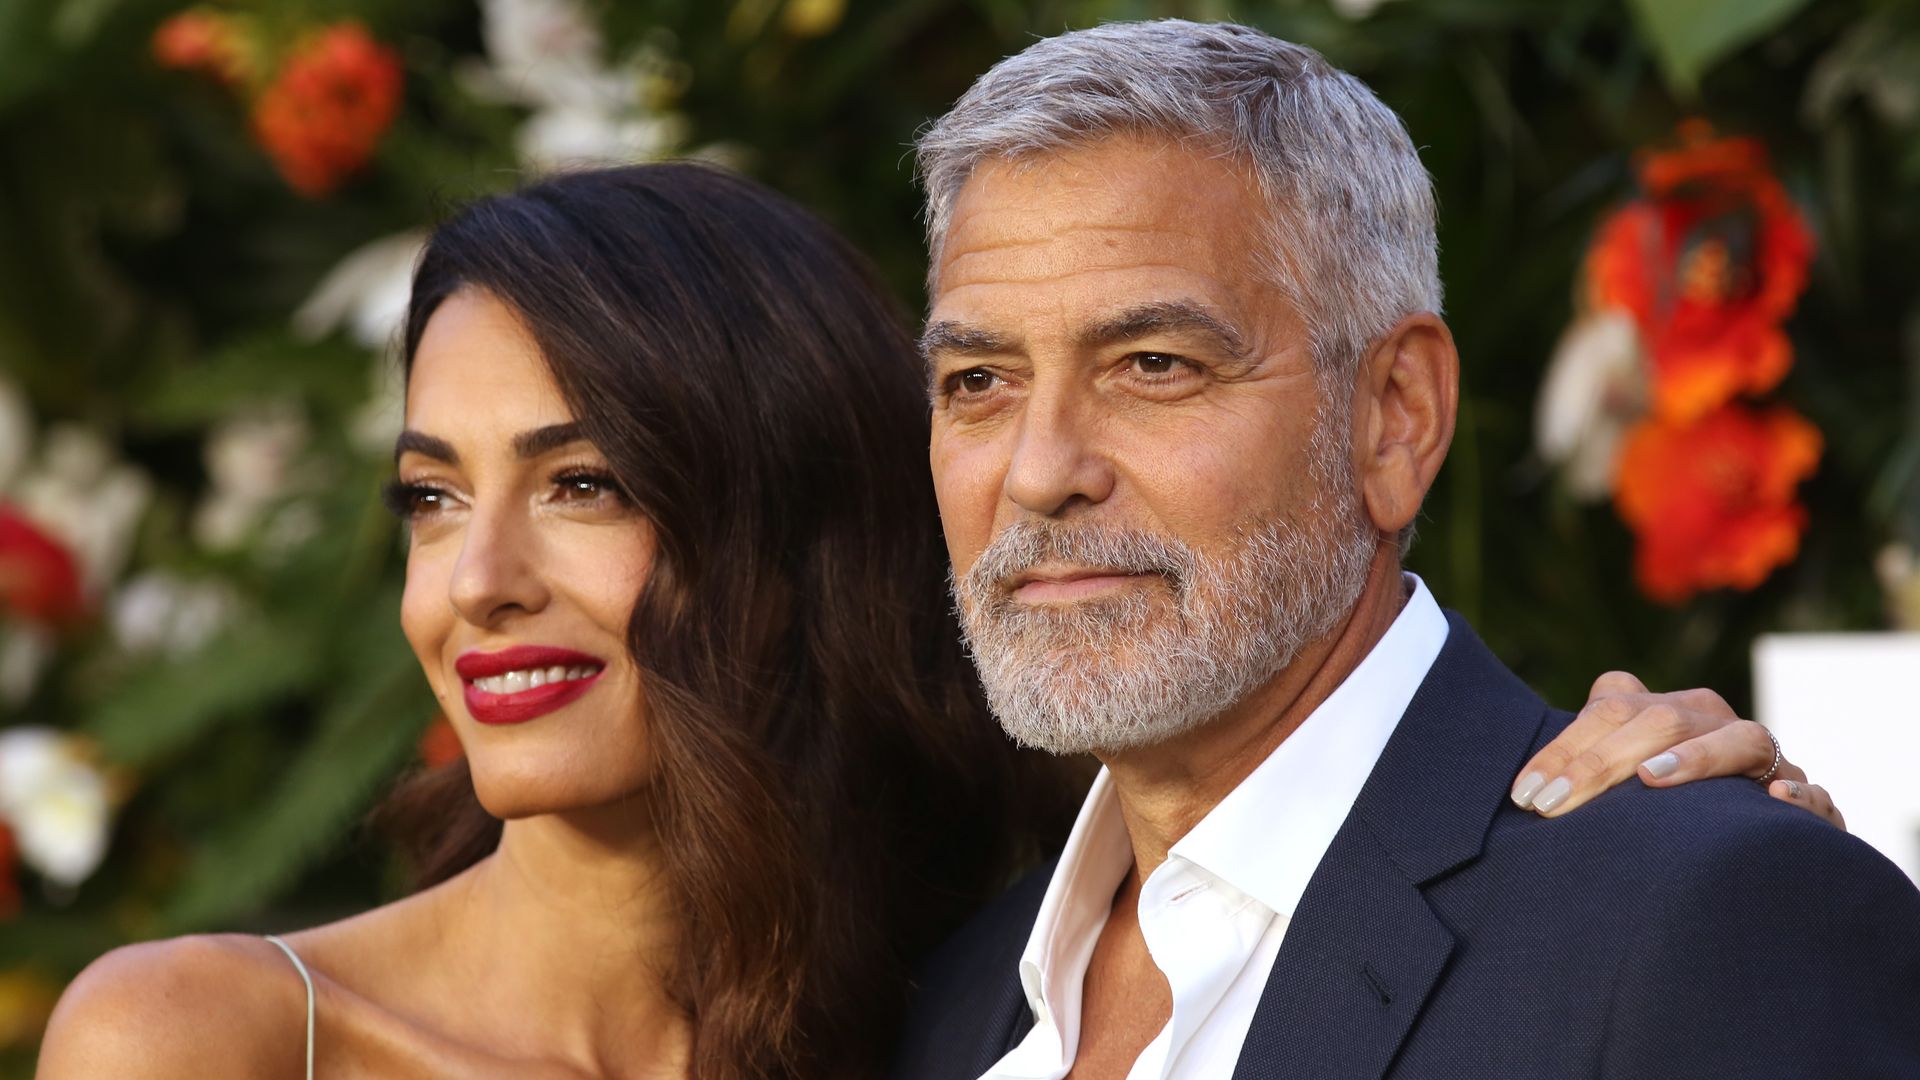 George Clooney and Amal Clooney attend the "Ticket To Paradise" World Premiere at Odeon Luxe Leicester Square on September 07, 2022 in London, England